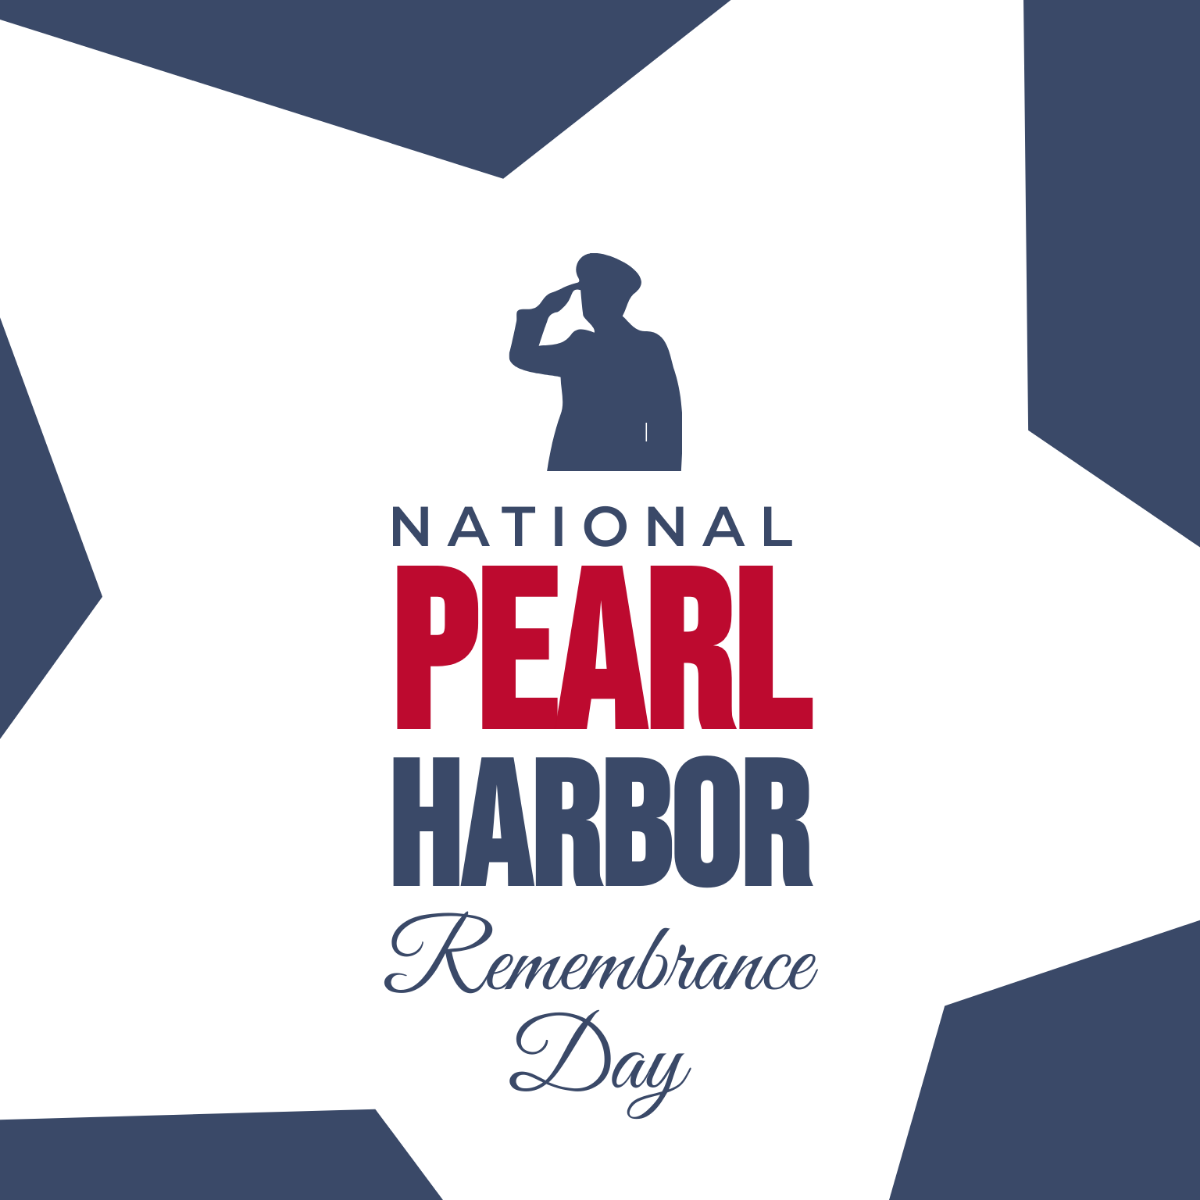 National Pearl Harbor Remembrance Day Illustration